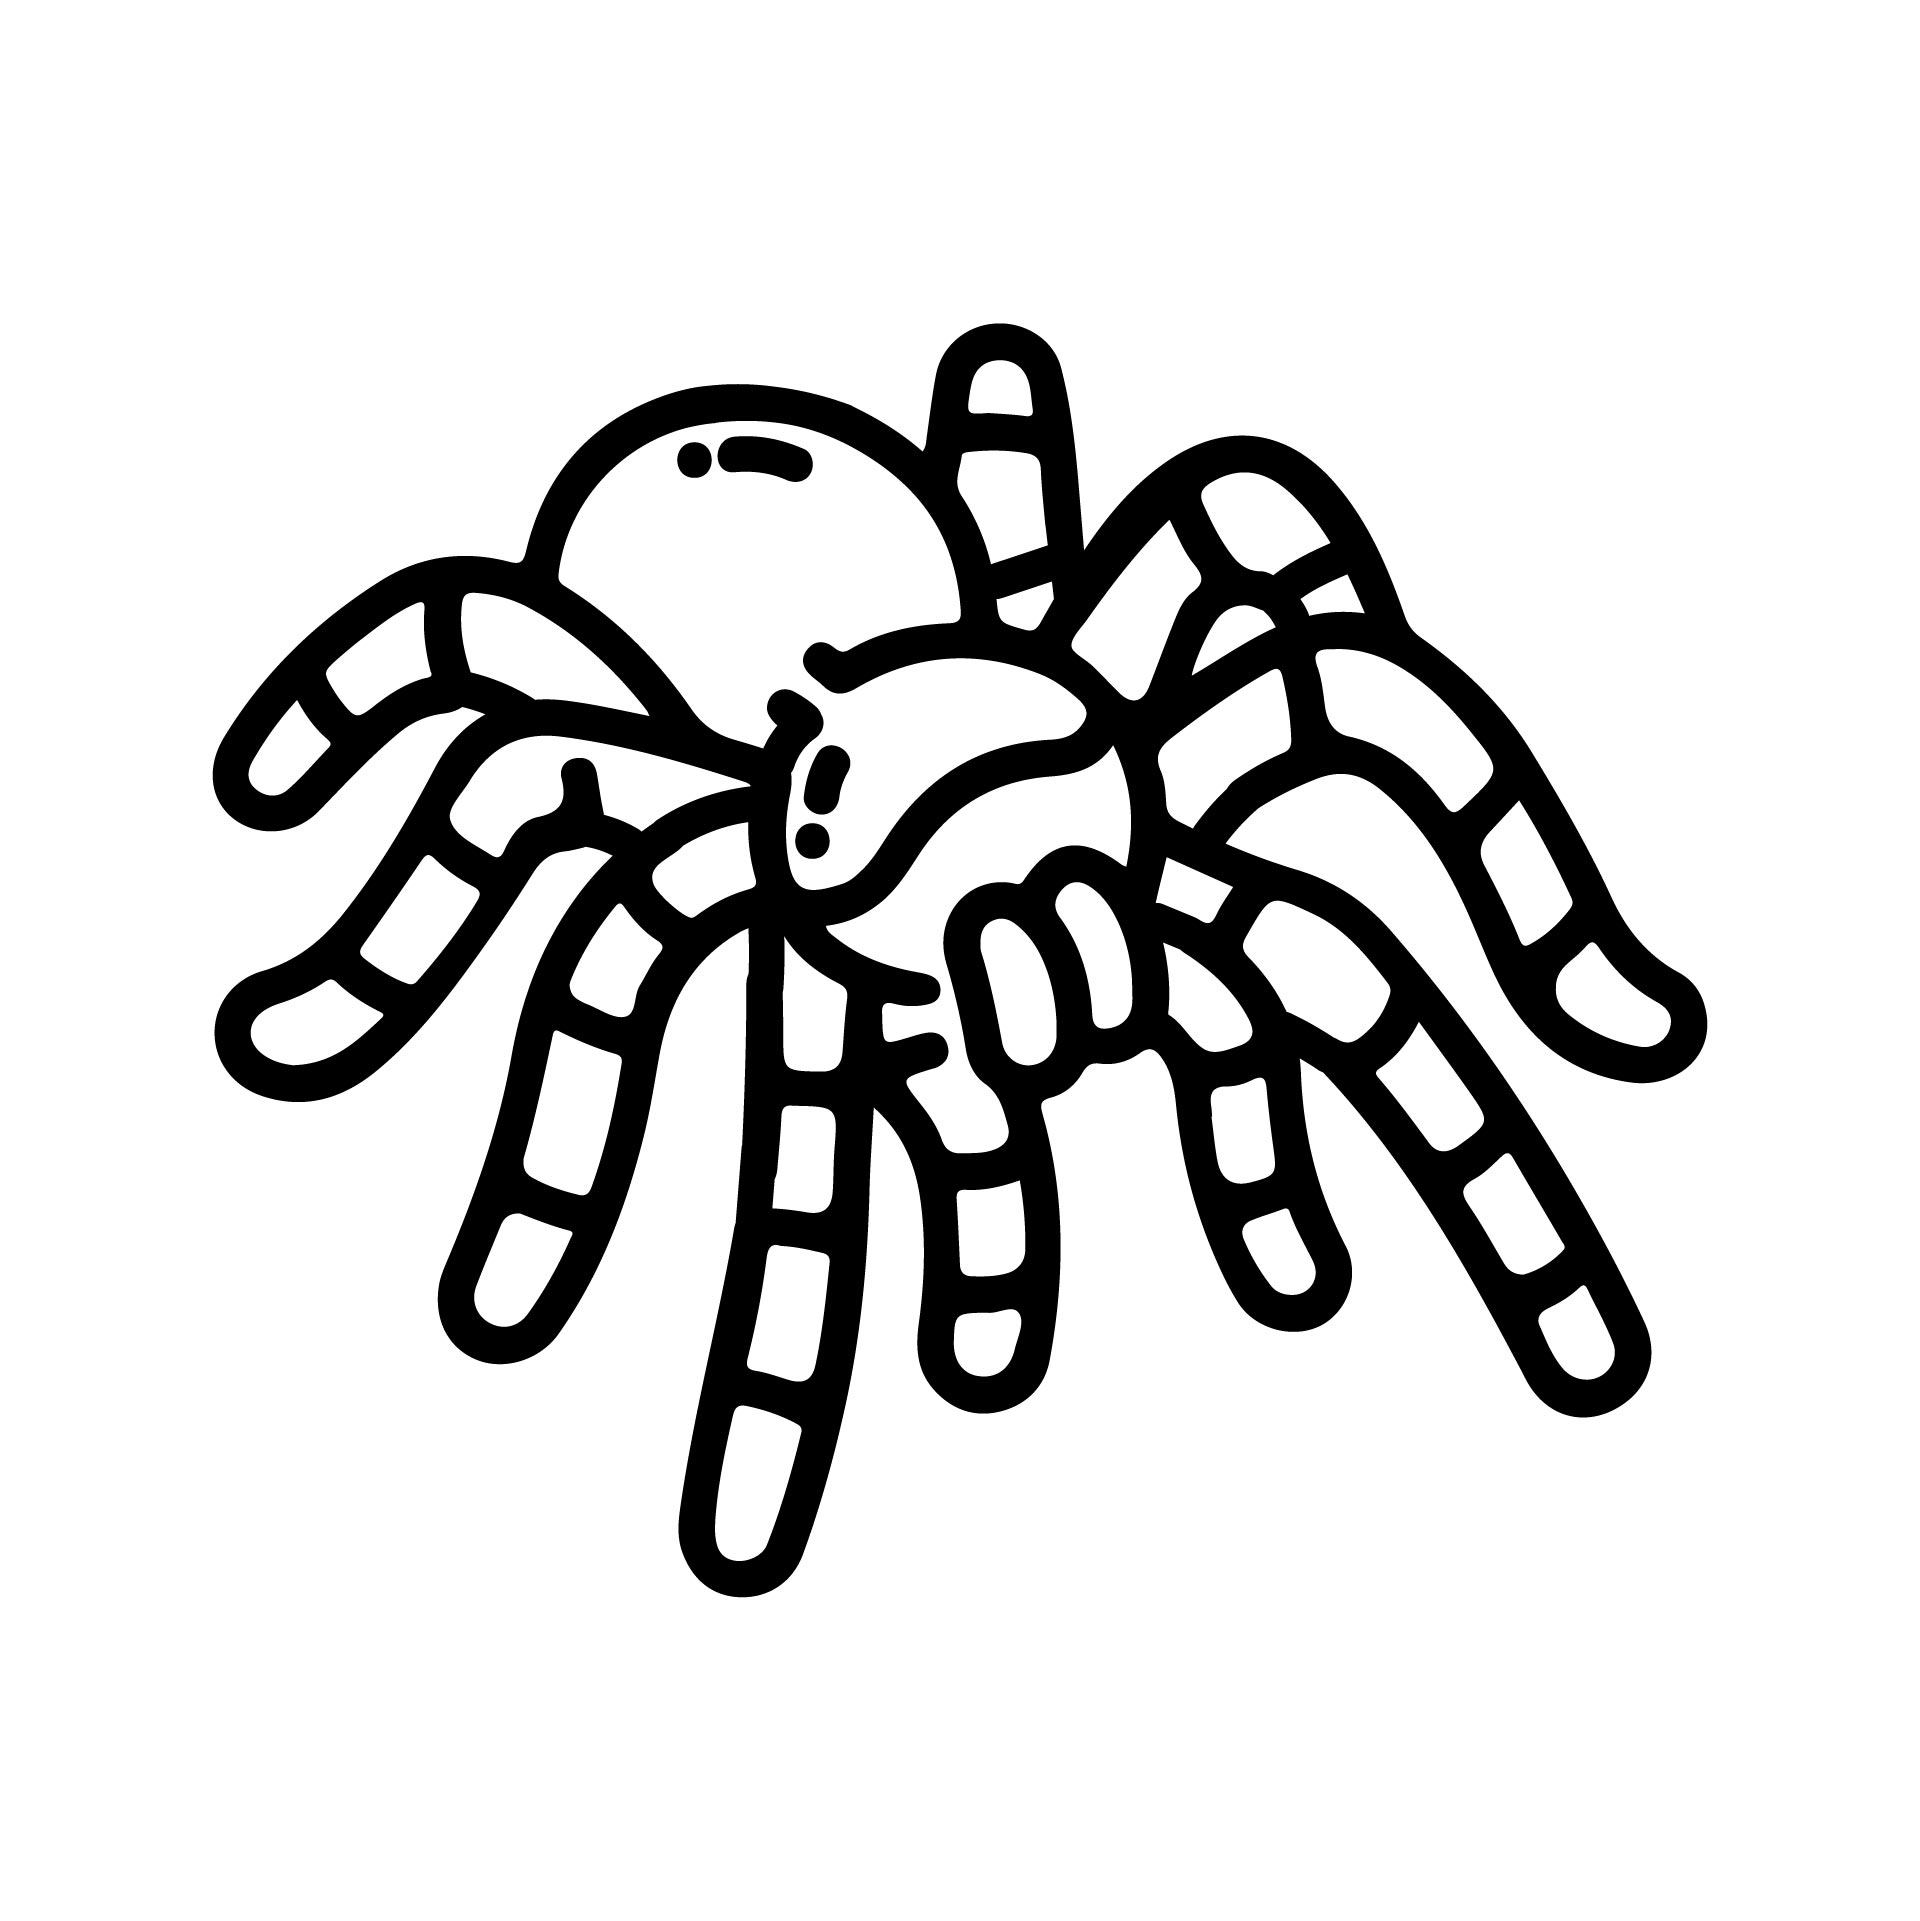 7 Best Images of Spiders For Halloween Printable Halloween Spider